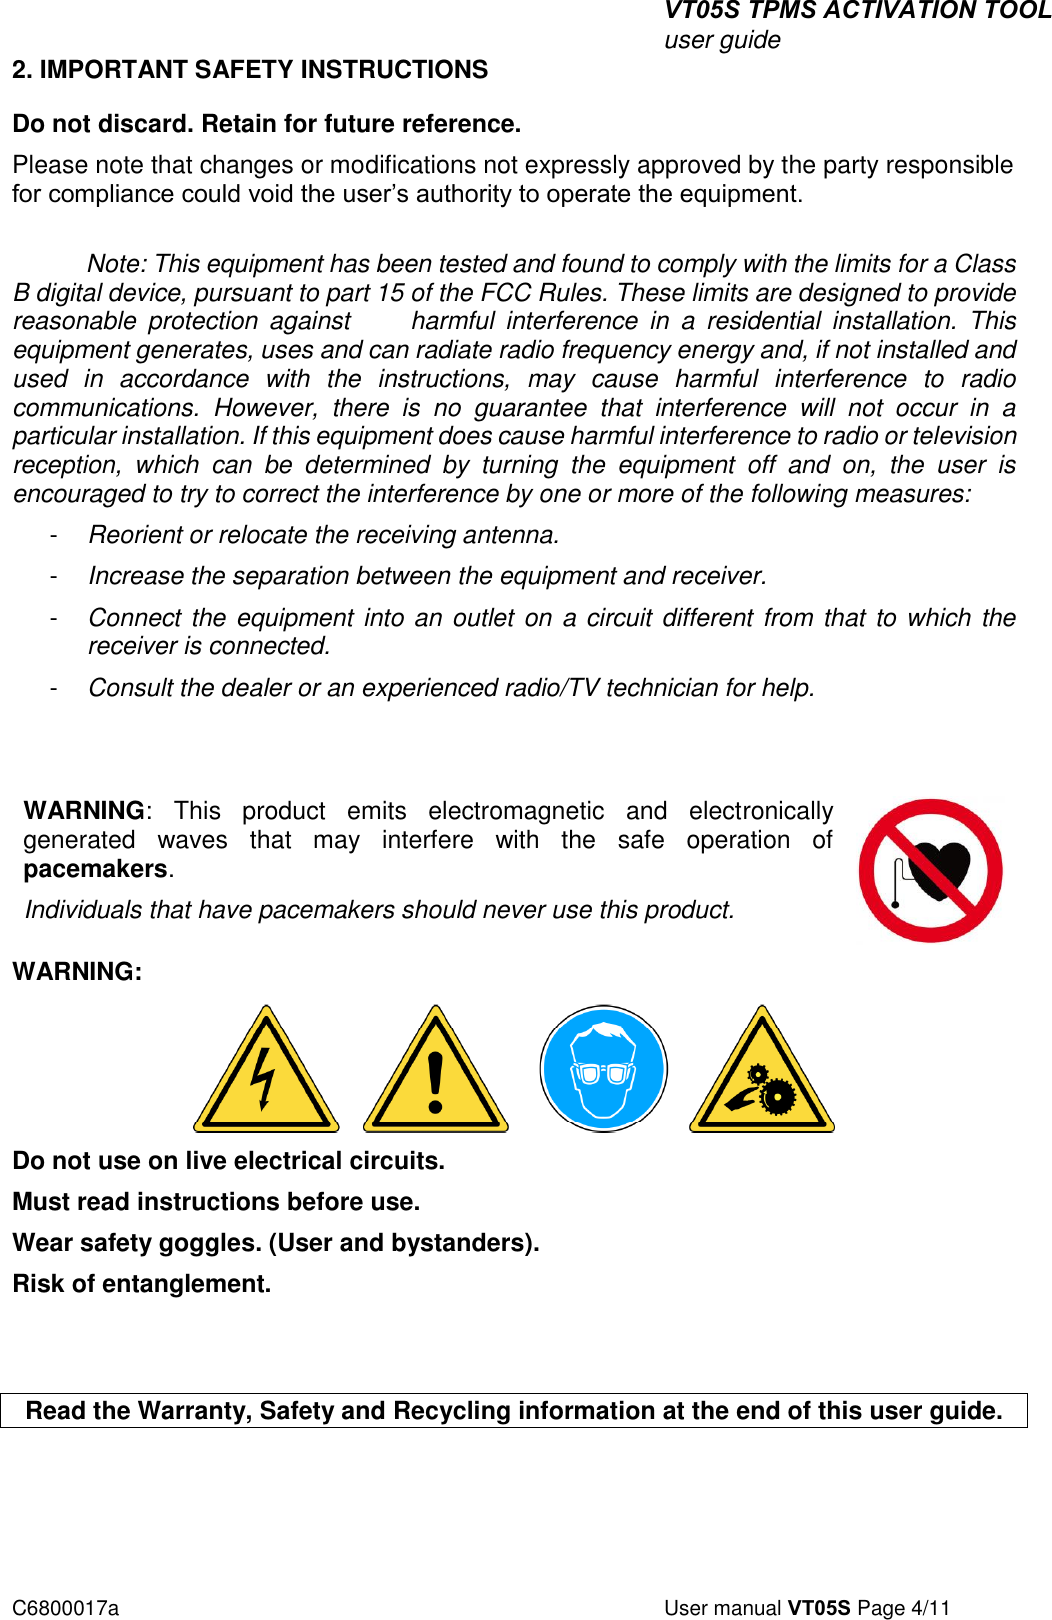 VT05S TPMS ACTIVATION TOOL user guide C6800017a  User manual VT05S Page 4/11 2. IMPORTANT SAFETY INSTRUCTIONSDo not discard. Retain for future reference. Please note that changes or modifications not expressly approved by the party responsible for compliance could void the user’s authority to operate the equipment. Note: This equipment has been tested and found to comply with the limits for a Class B digital device, pursuant to part 15 of the FCC Rules. These limits are designed to provide reasonable  protection  against         harmful  interference  in  a  residential  installation.  This equipment generates, uses and can radiate radio frequency energy and, if not installed and used  in  accordance  with  the  instructions,  may  cause  harmful  interference  to  radio communications.  However,  there  is  no  guarantee  that  interference  will  not  occur  in  a particular installation. If this equipment does cause harmful interference to radio or television reception,  which  can  be  determined  by  turning  the  equipment  off  and  on,  the  user  is encouraged to try to correct the interference by one or more of the following measures: -  Reorient or relocate the receiving antenna. -  Increase the separation between the equipment and receiver. -  Connect the equipment into an outlet on a circuit different from that  to which the receiver is connected. -  Consult the dealer or an experienced radio/TV technician for help. WARNING:  This  product  emits  electromagnetic  and  electronically generated  waves  that  may  interfere  with  the  safe  operation  of pacemakers. Individuals that have pacemakers should never use this product. WARNING: Do not use on live electrical circuits. Must read instructions before use. Wear safety goggles. (User and bystanders). Risk of entanglement.  Read the Warranty, Safety and Recycling information at the end of this user guide. 